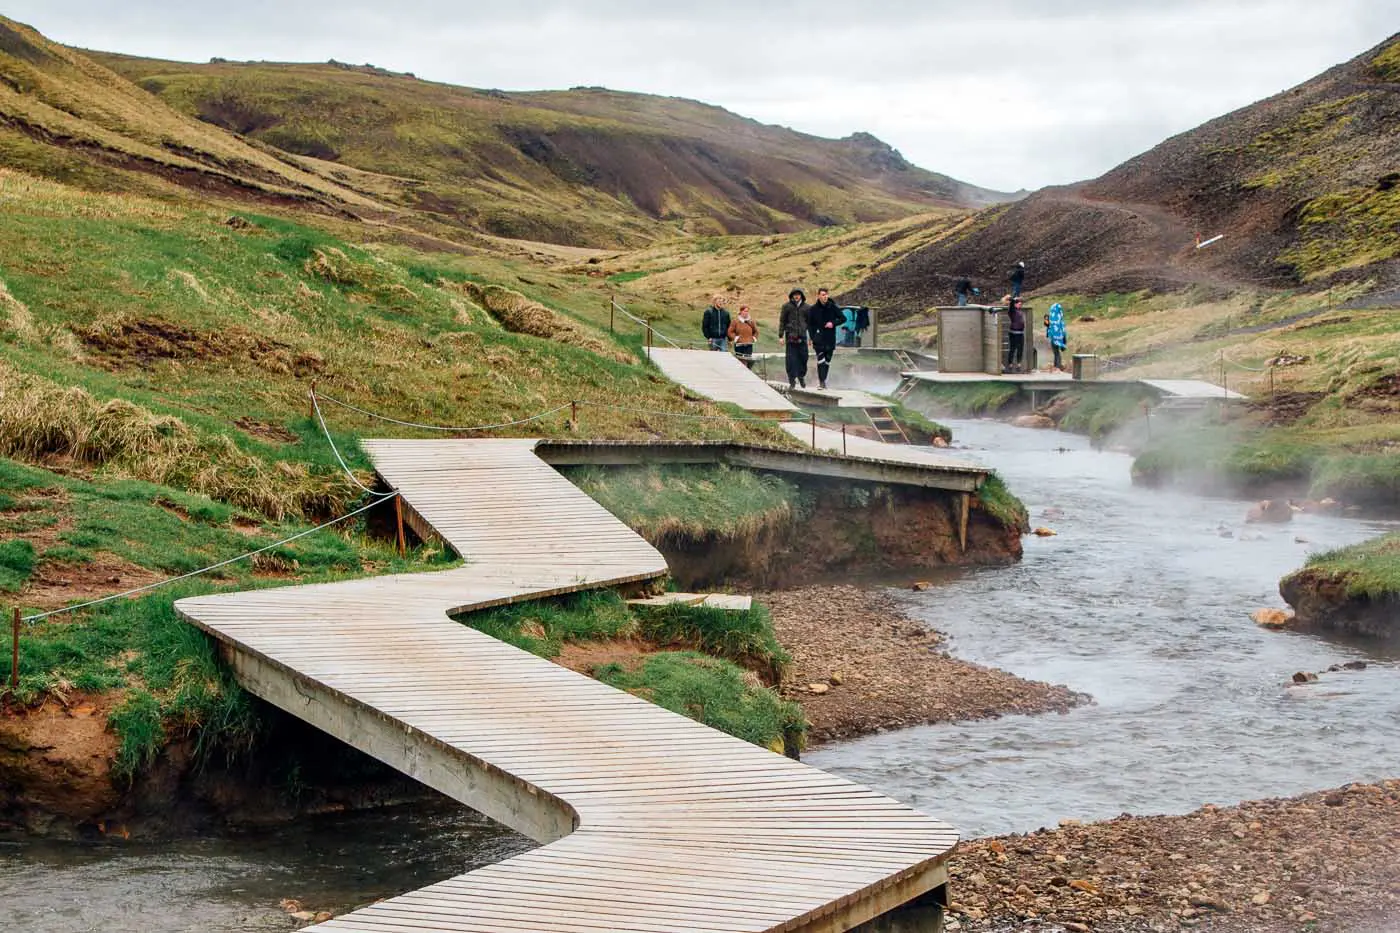 A wooden boardwalk winding around the Reykjadalur Hot Spring Thermal River